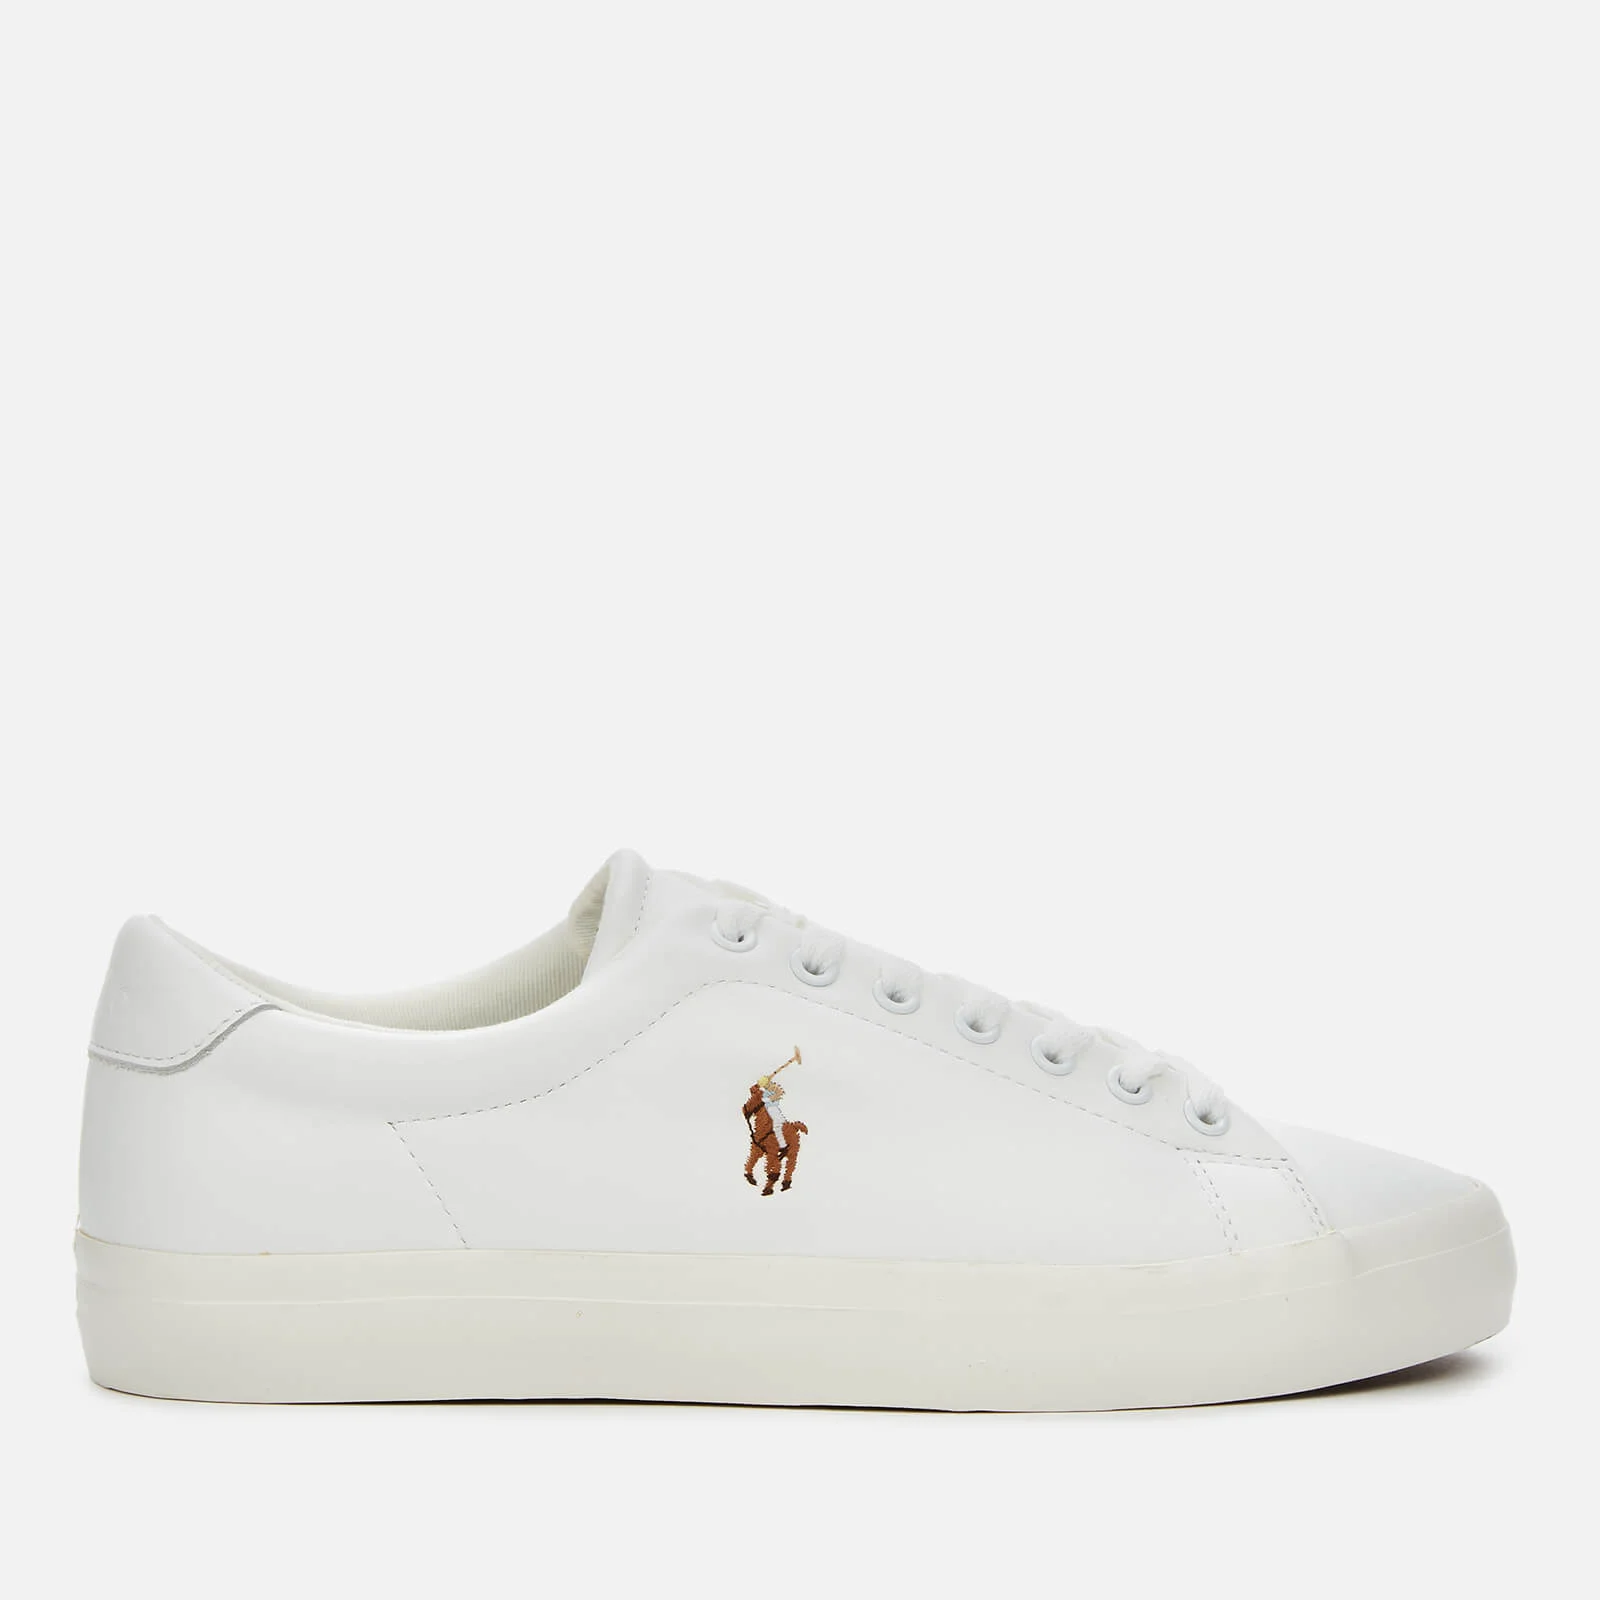 Polo Ralph Lauren Men's Longwood Leather Low Top Trainers - White/White Image 1